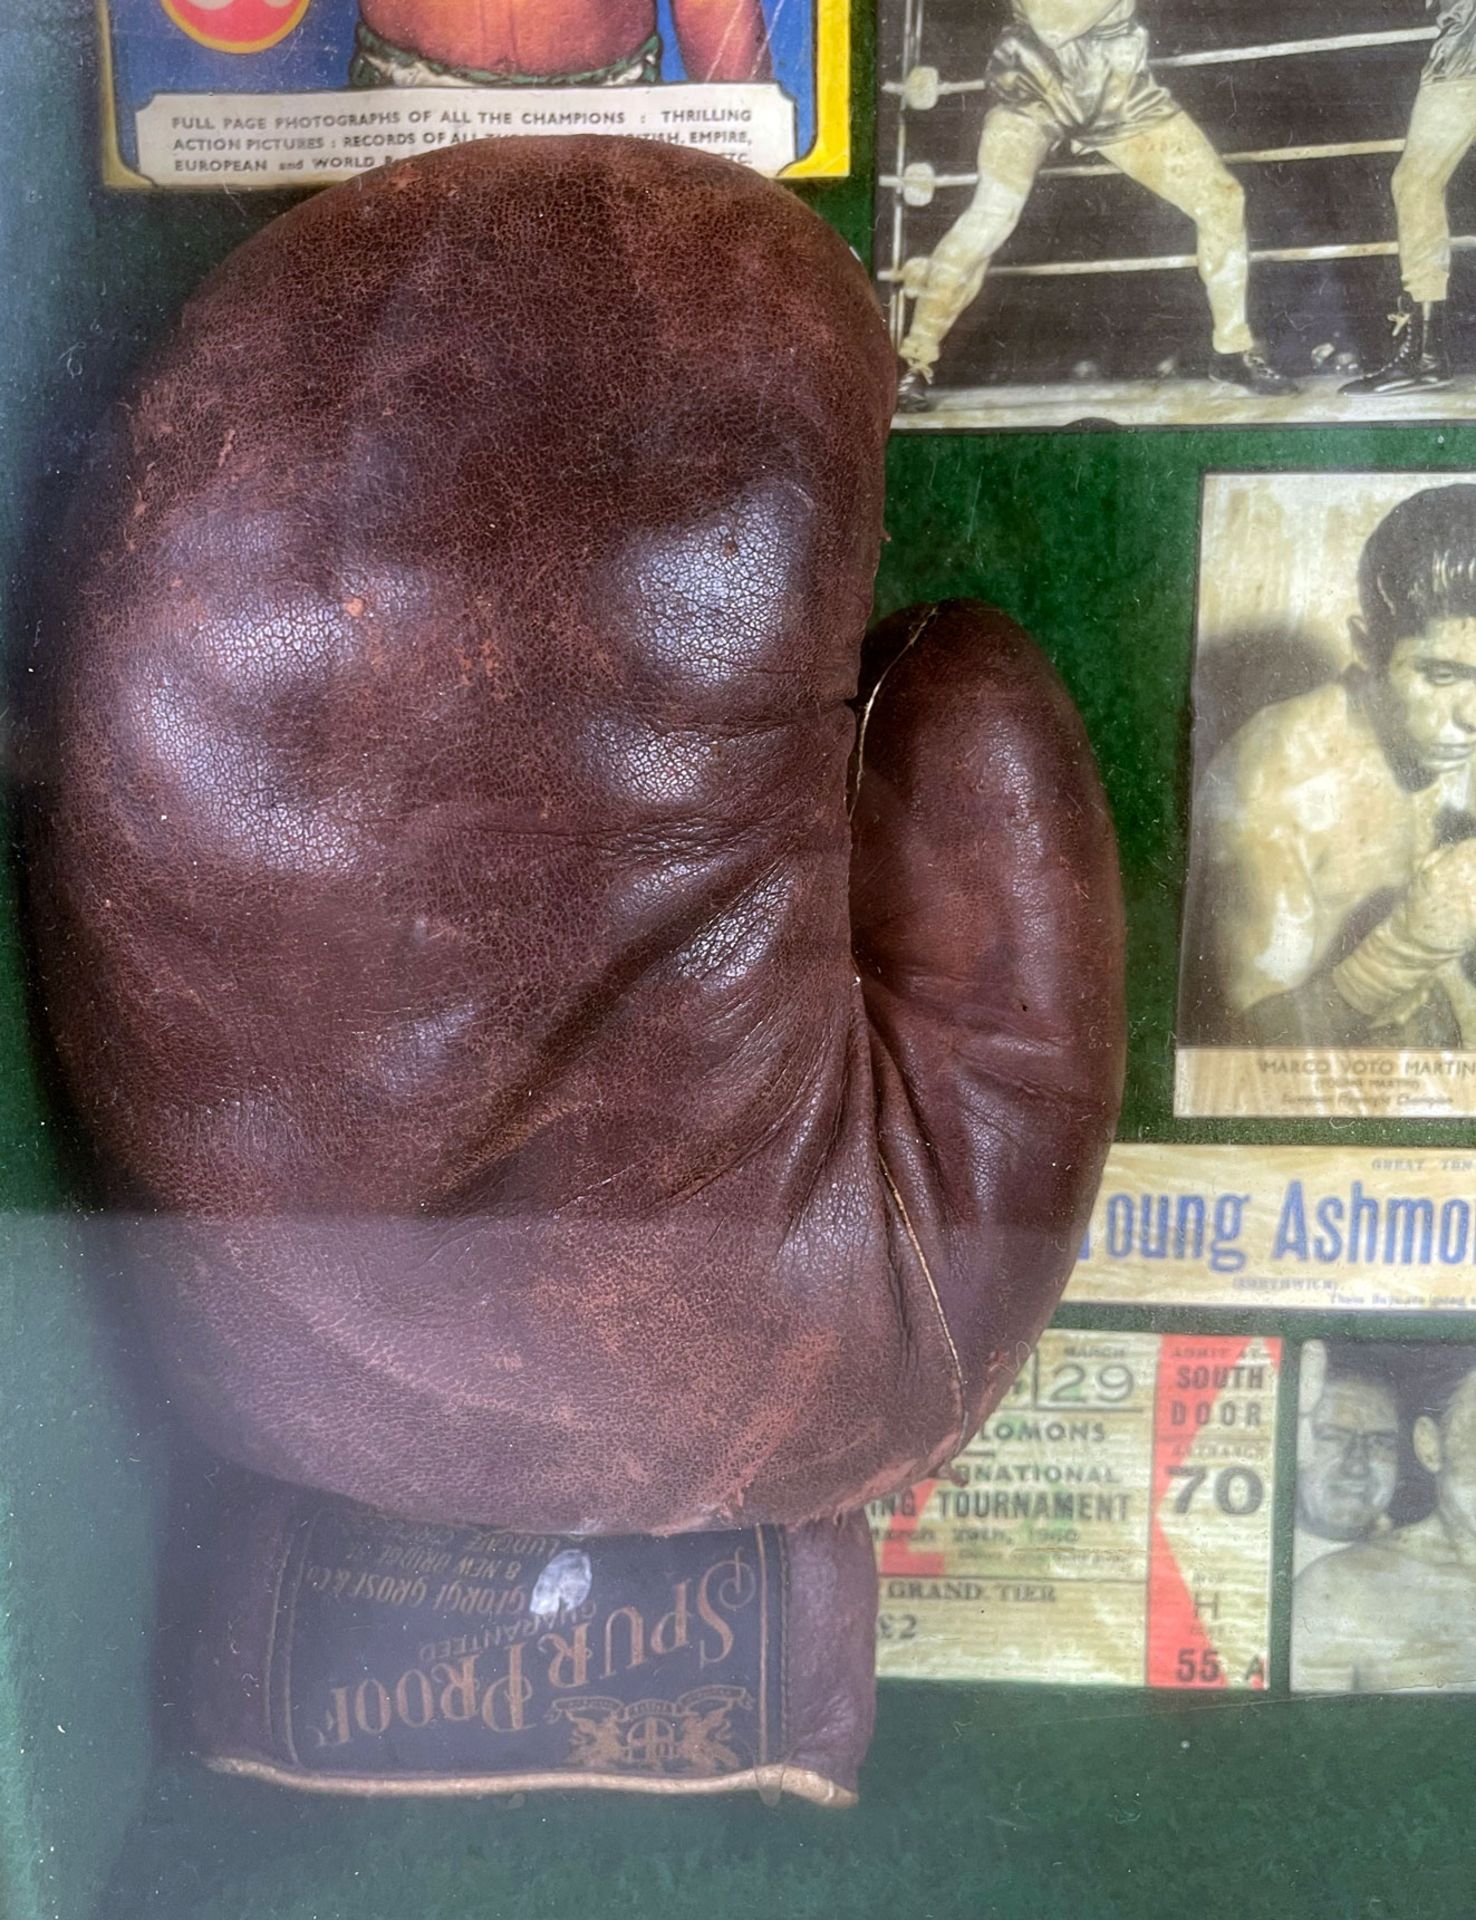 1955-1960 Boxing Memorabilia Shadow Box with Gloves - Image 2 of 5